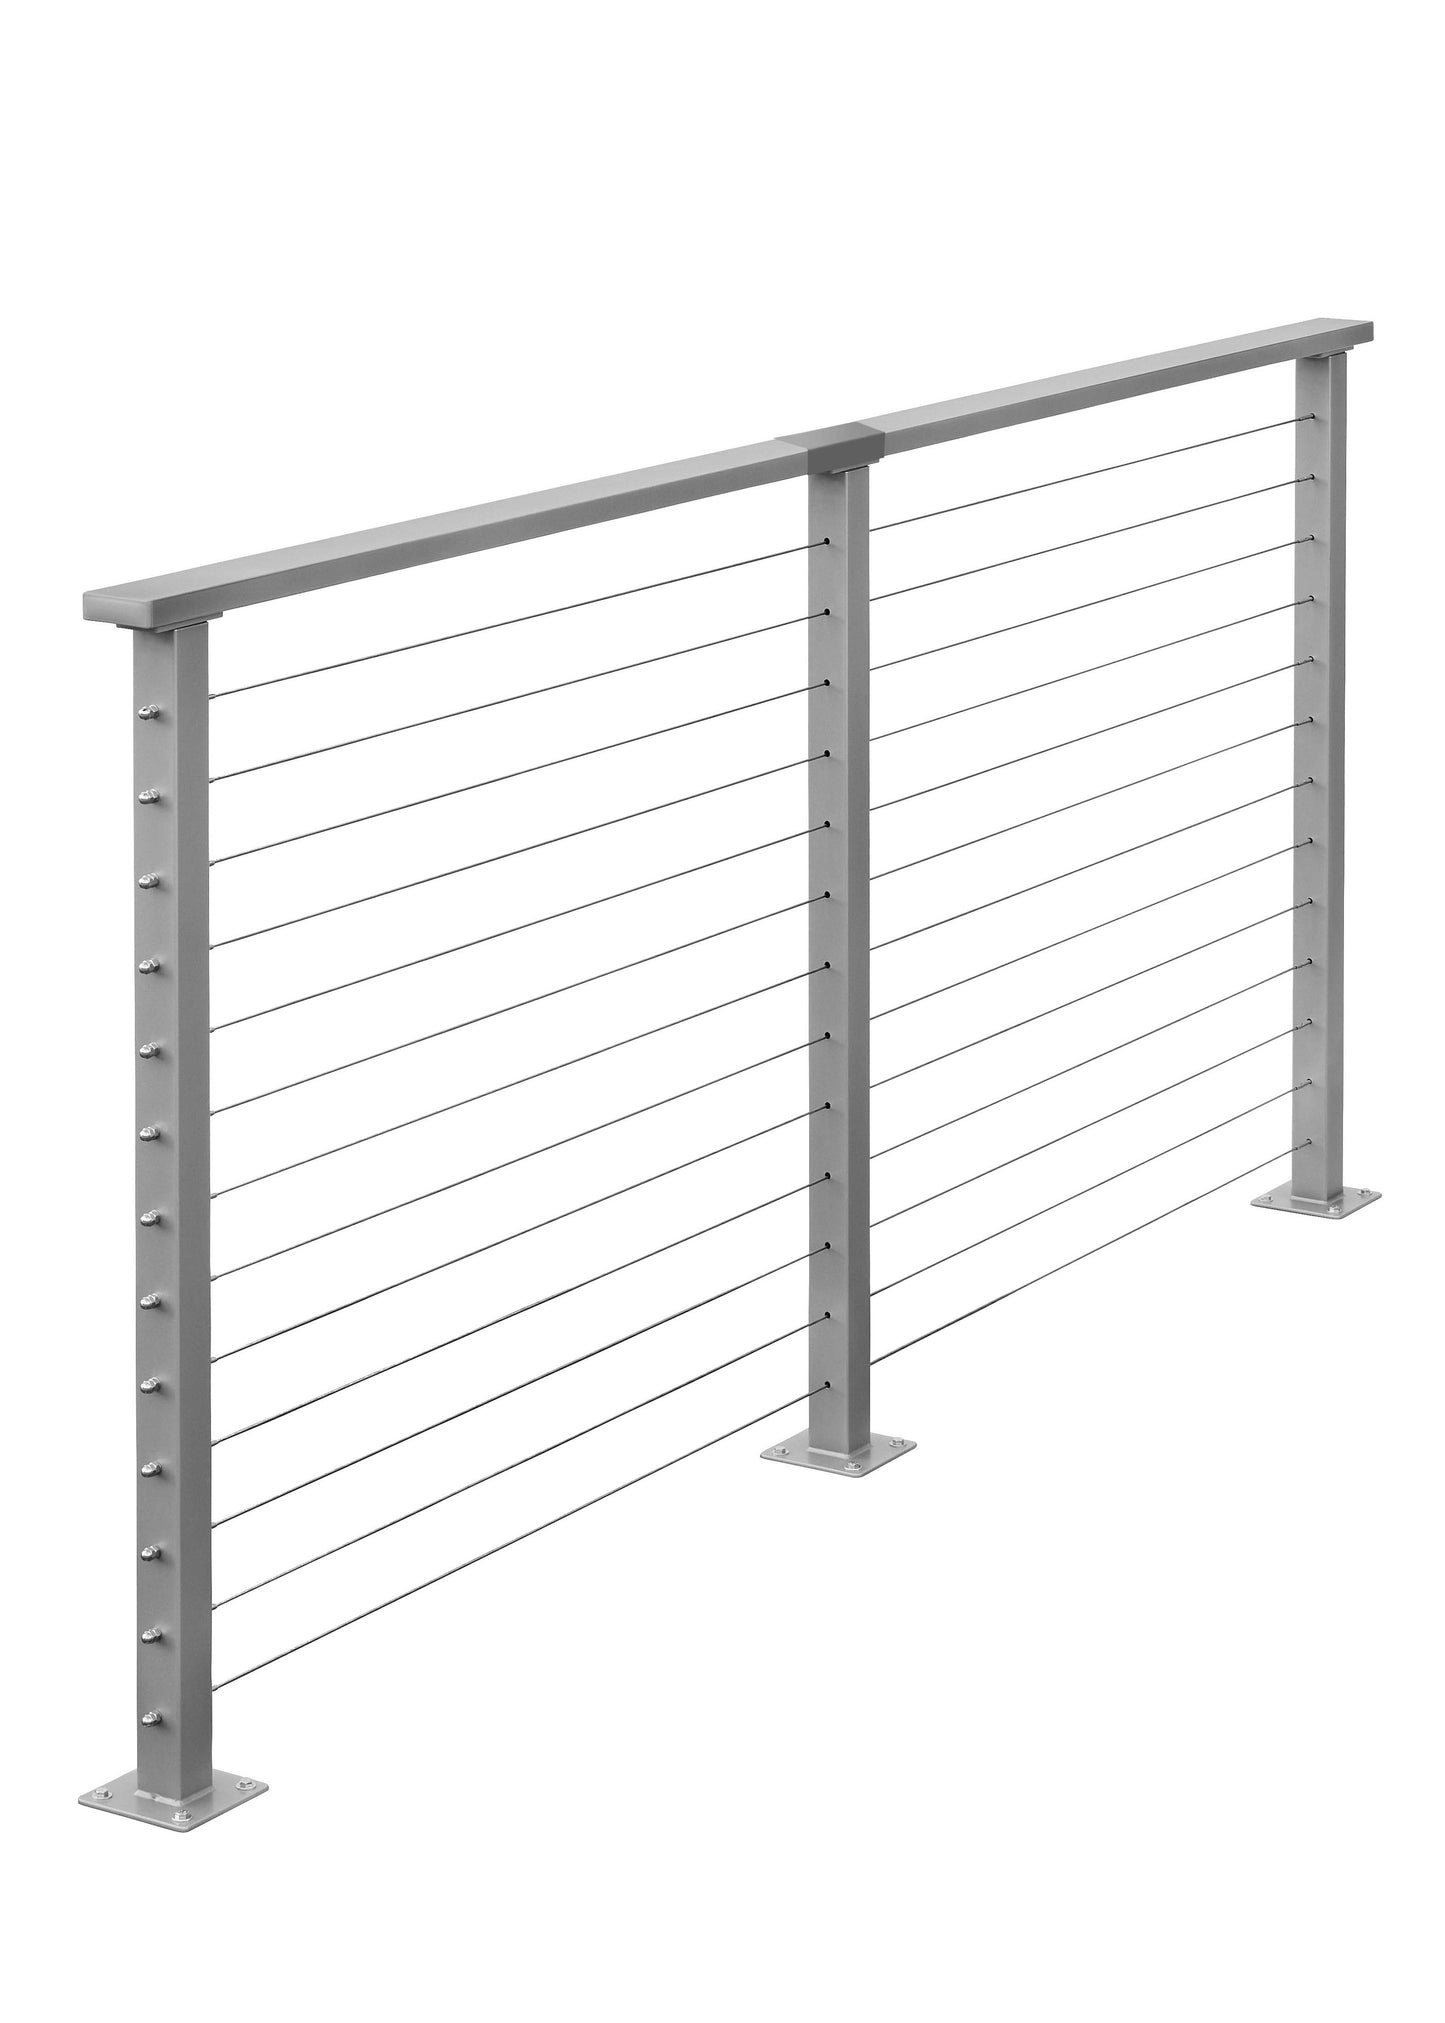 7 ft. Deck Cable Railing, 42 in. Base Mount, Grey